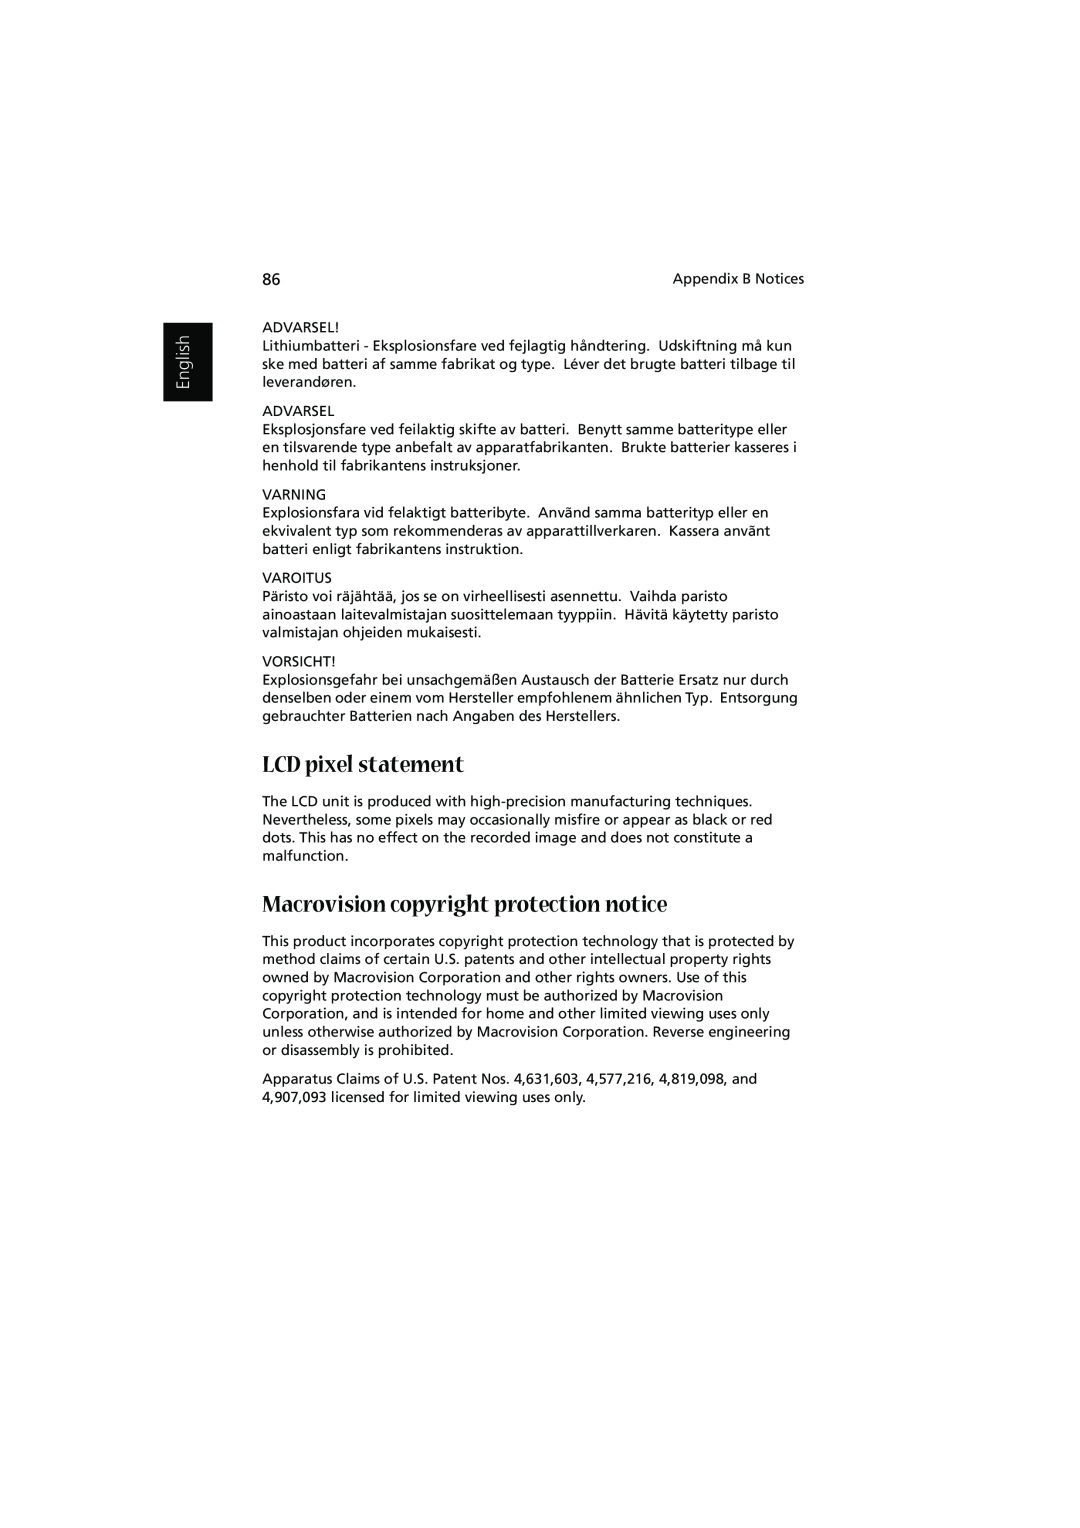 Acer 1450 manual LCD pixel statement, Macrovision copyright protection notice, English 